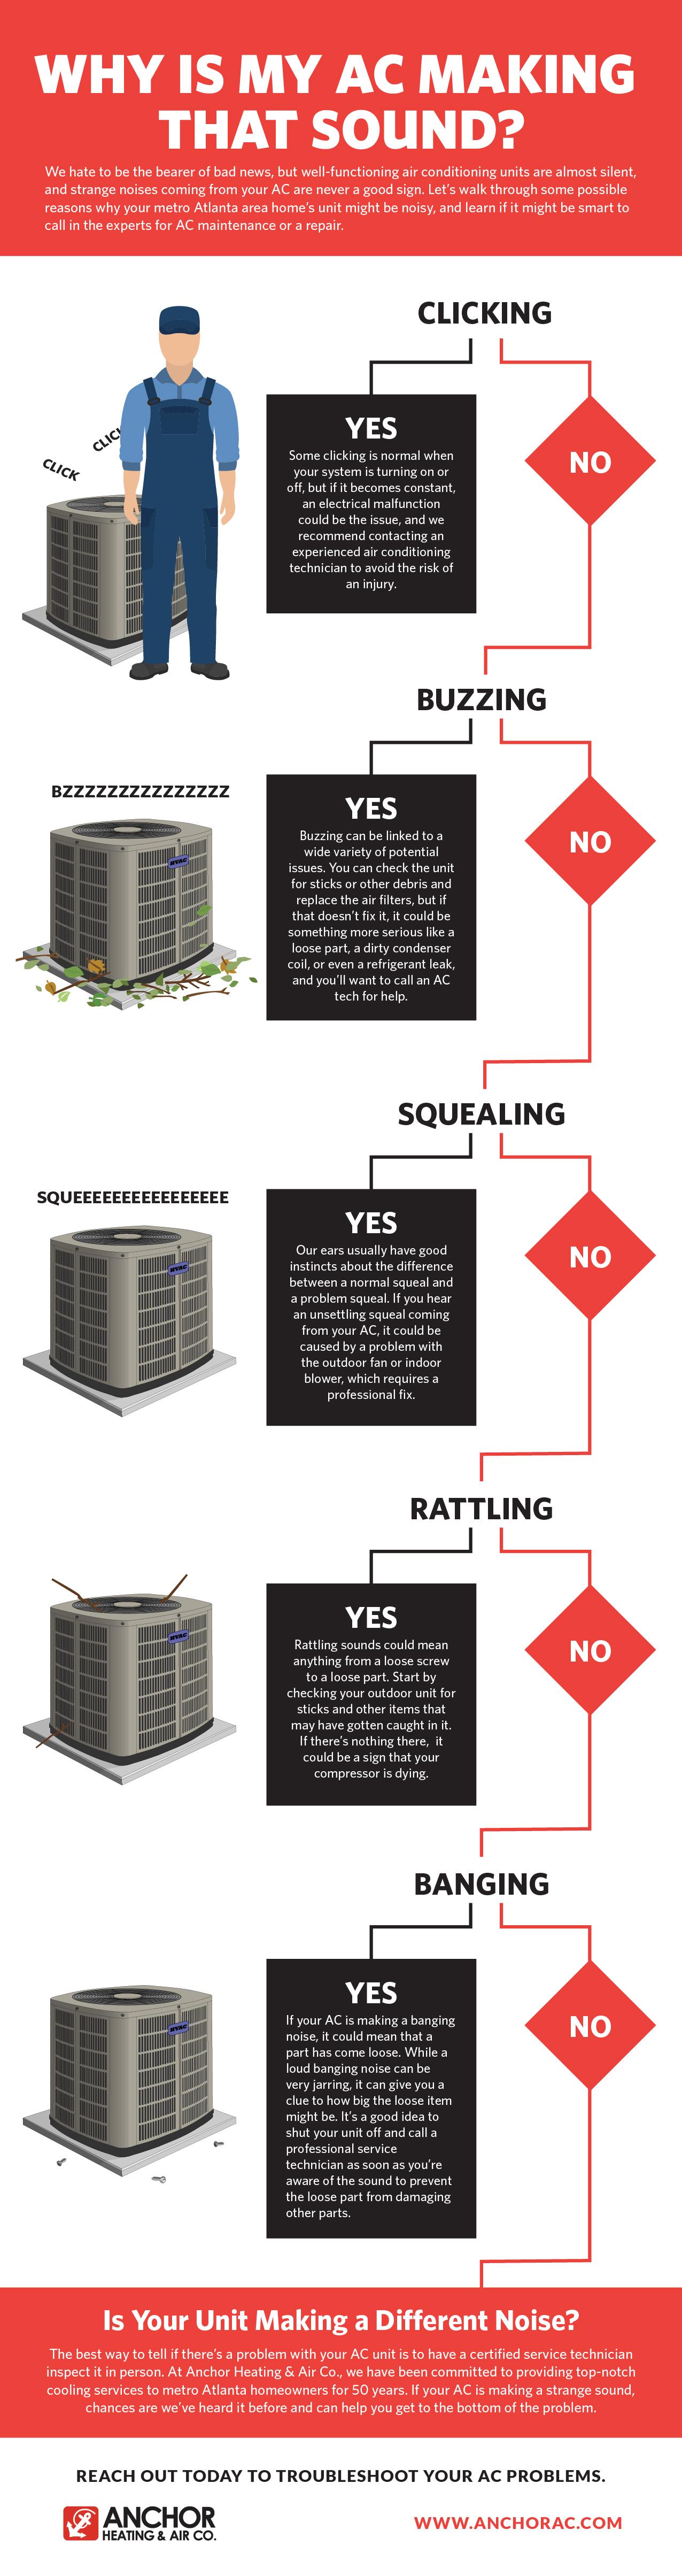 Why is My AC Making that Sound? Infographic